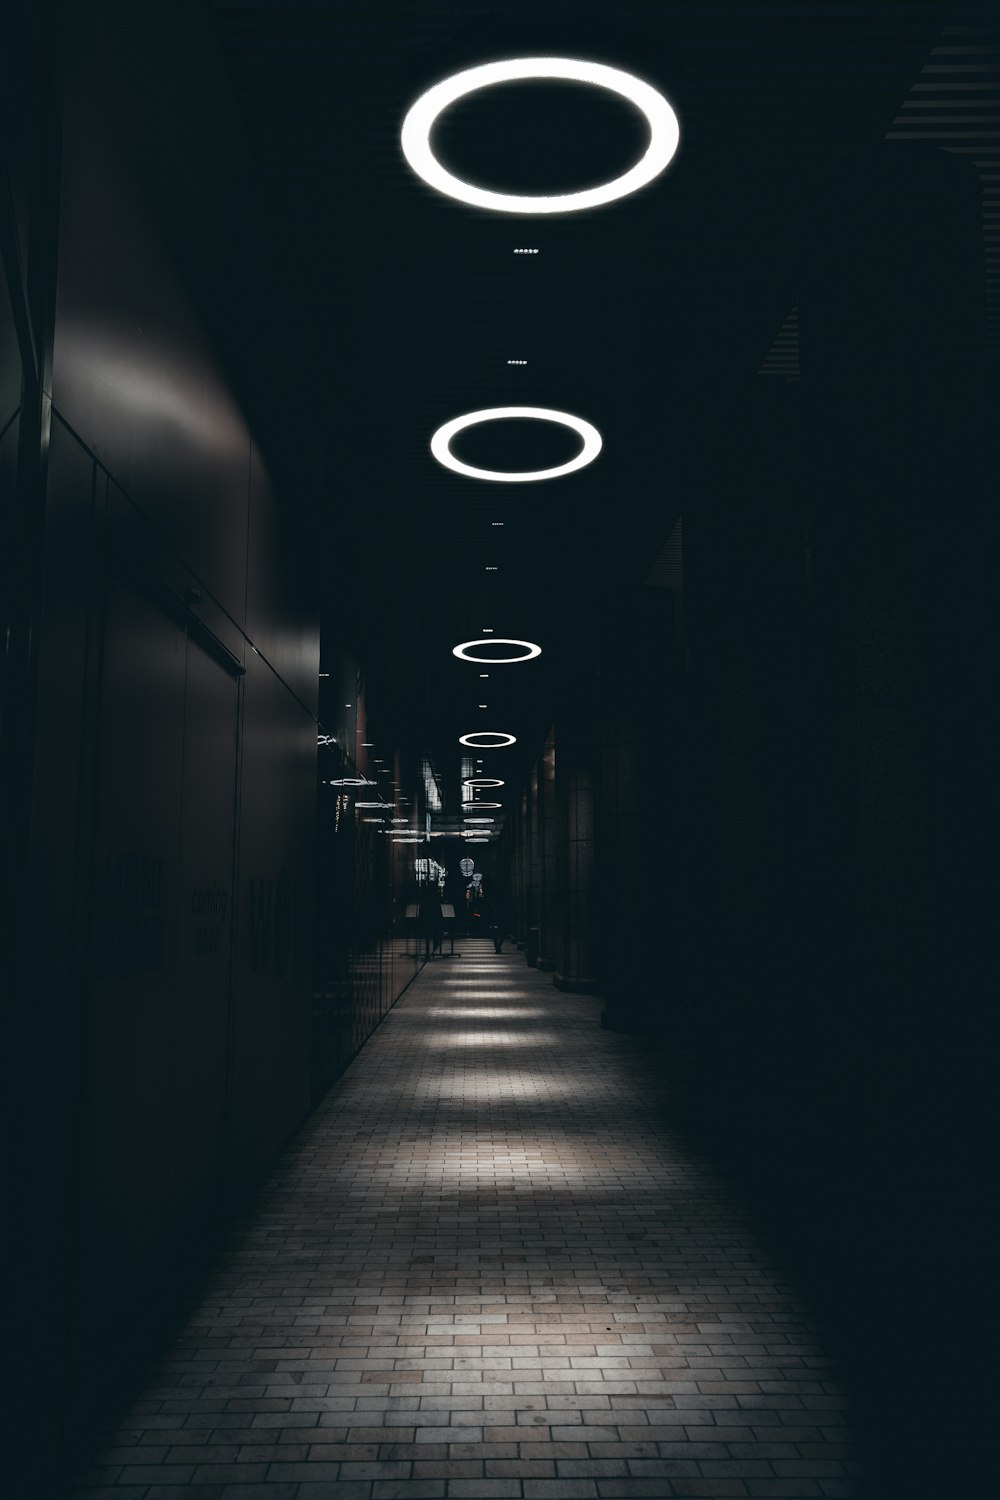 a long dark hallway with lights on the ceiling